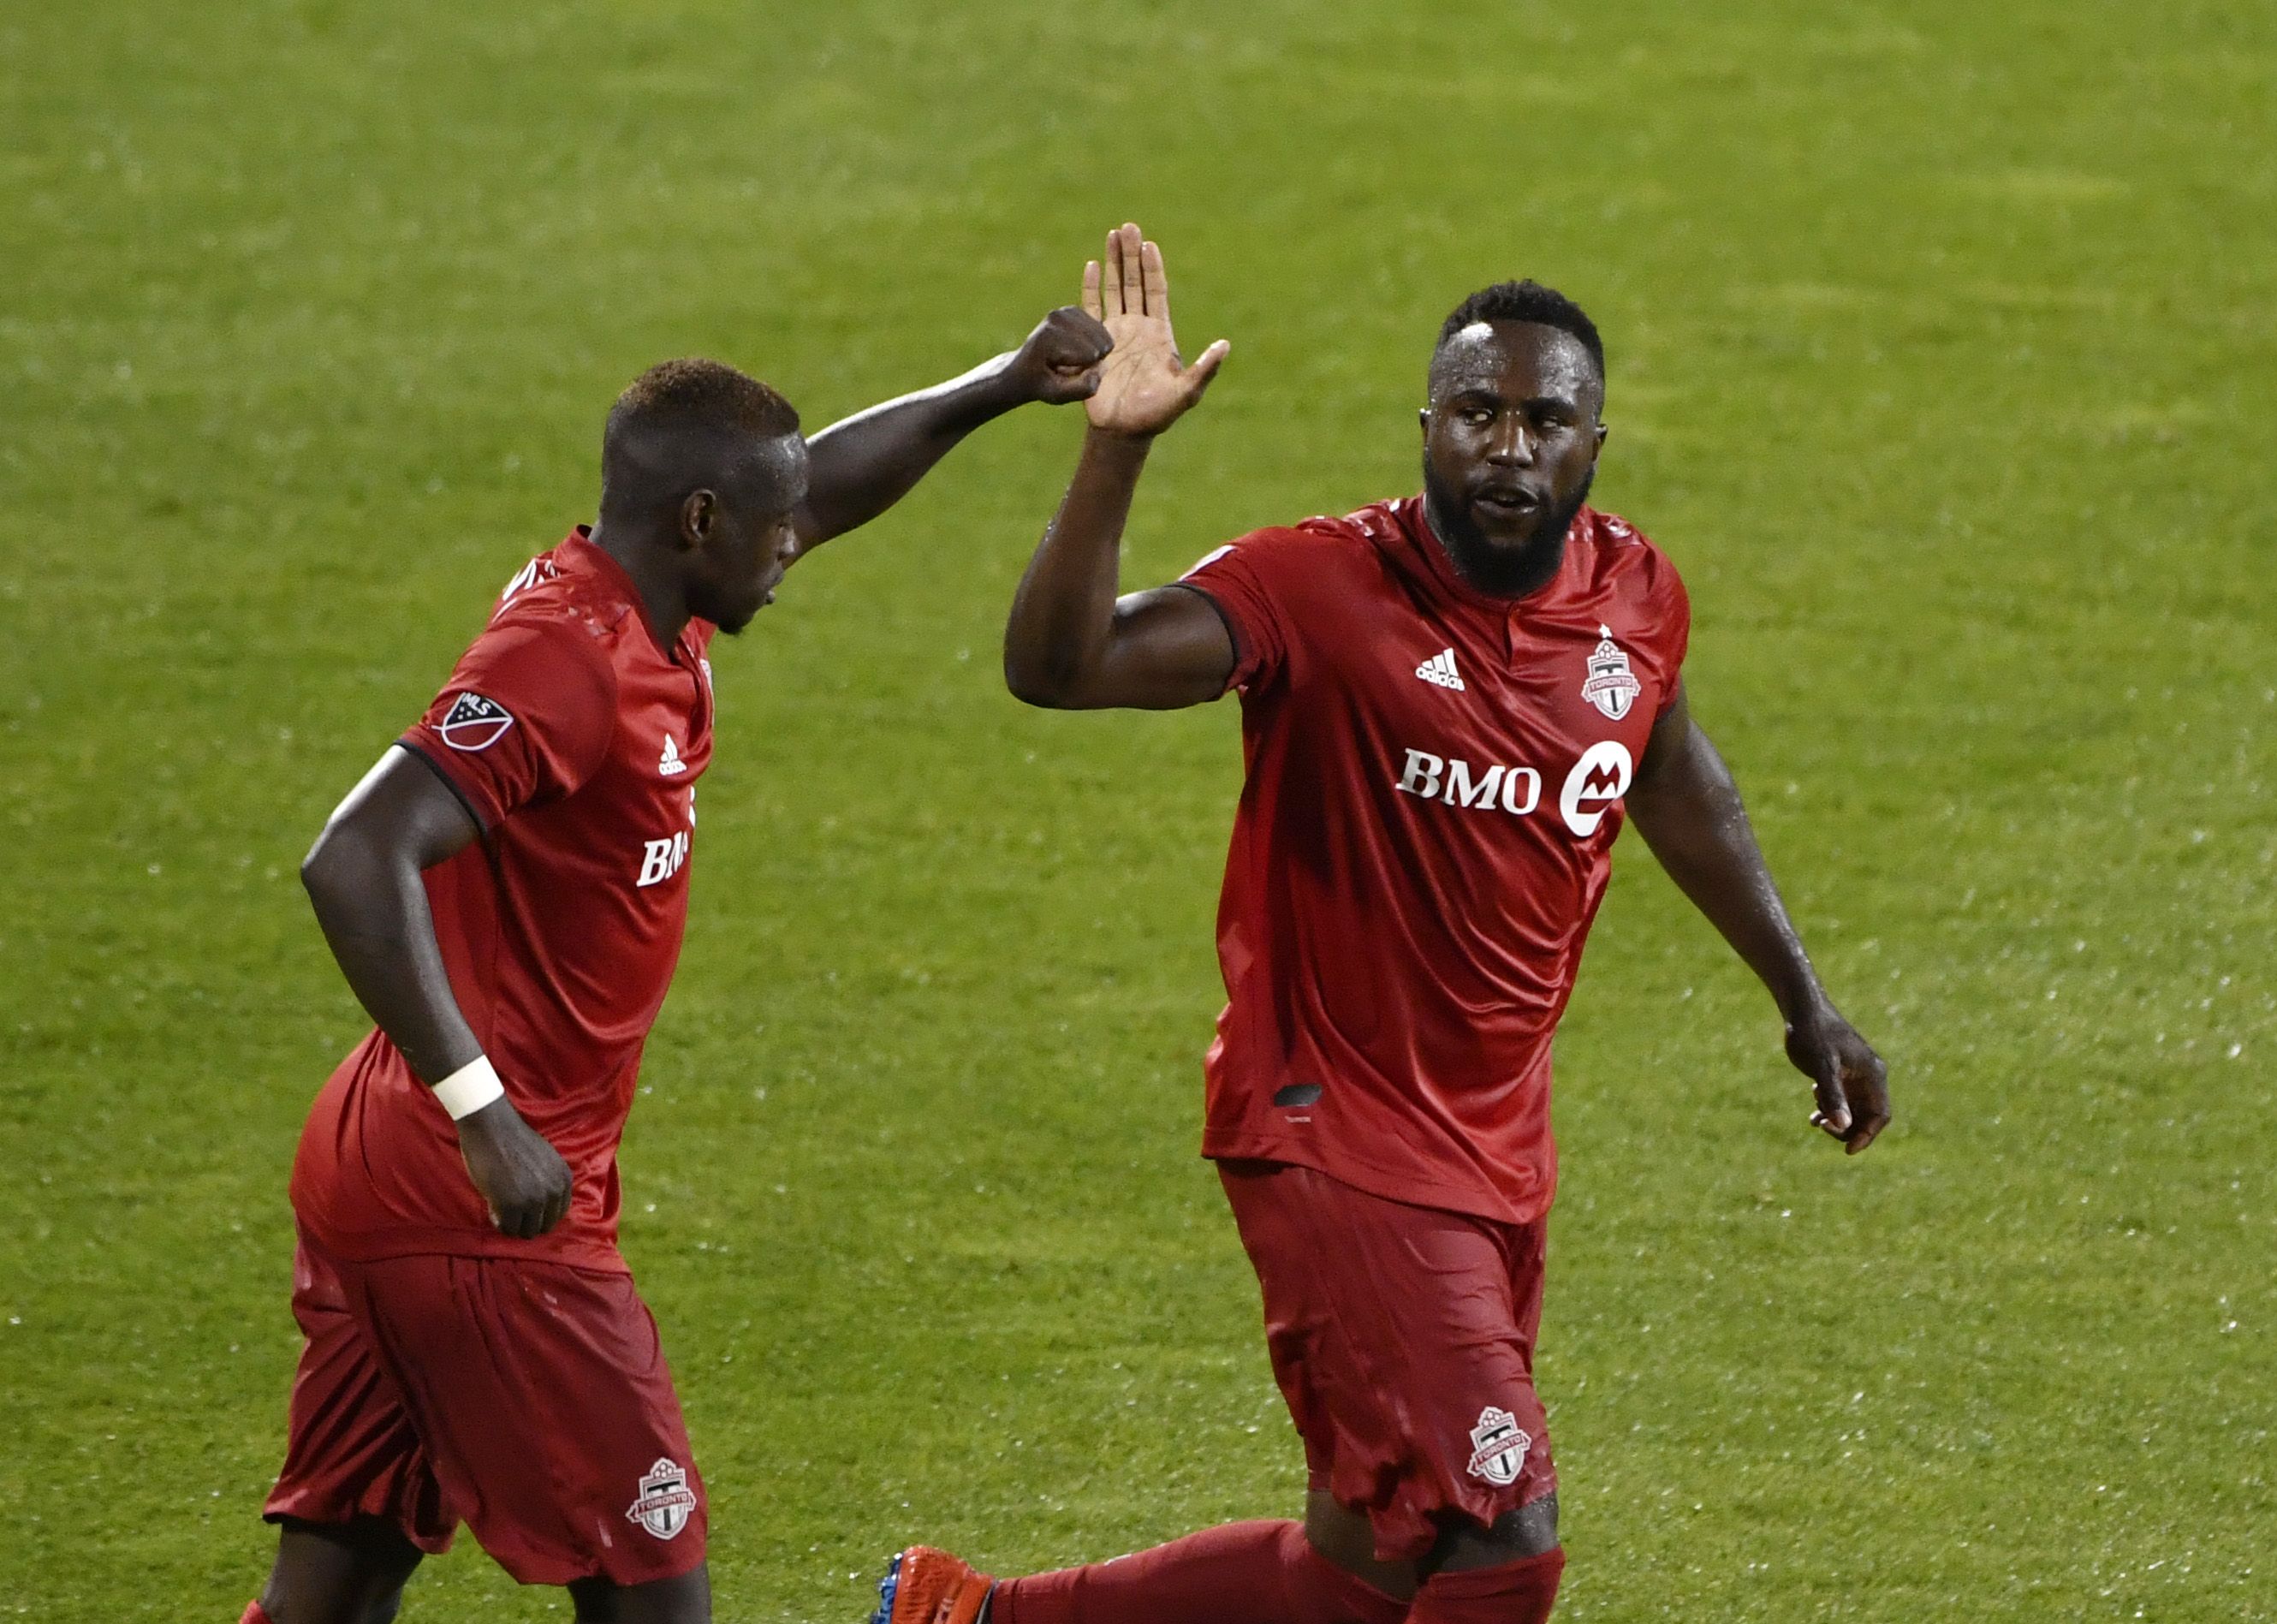 Veteran Patrick Mullins happy to share his experience with Toronto FC's  young talent